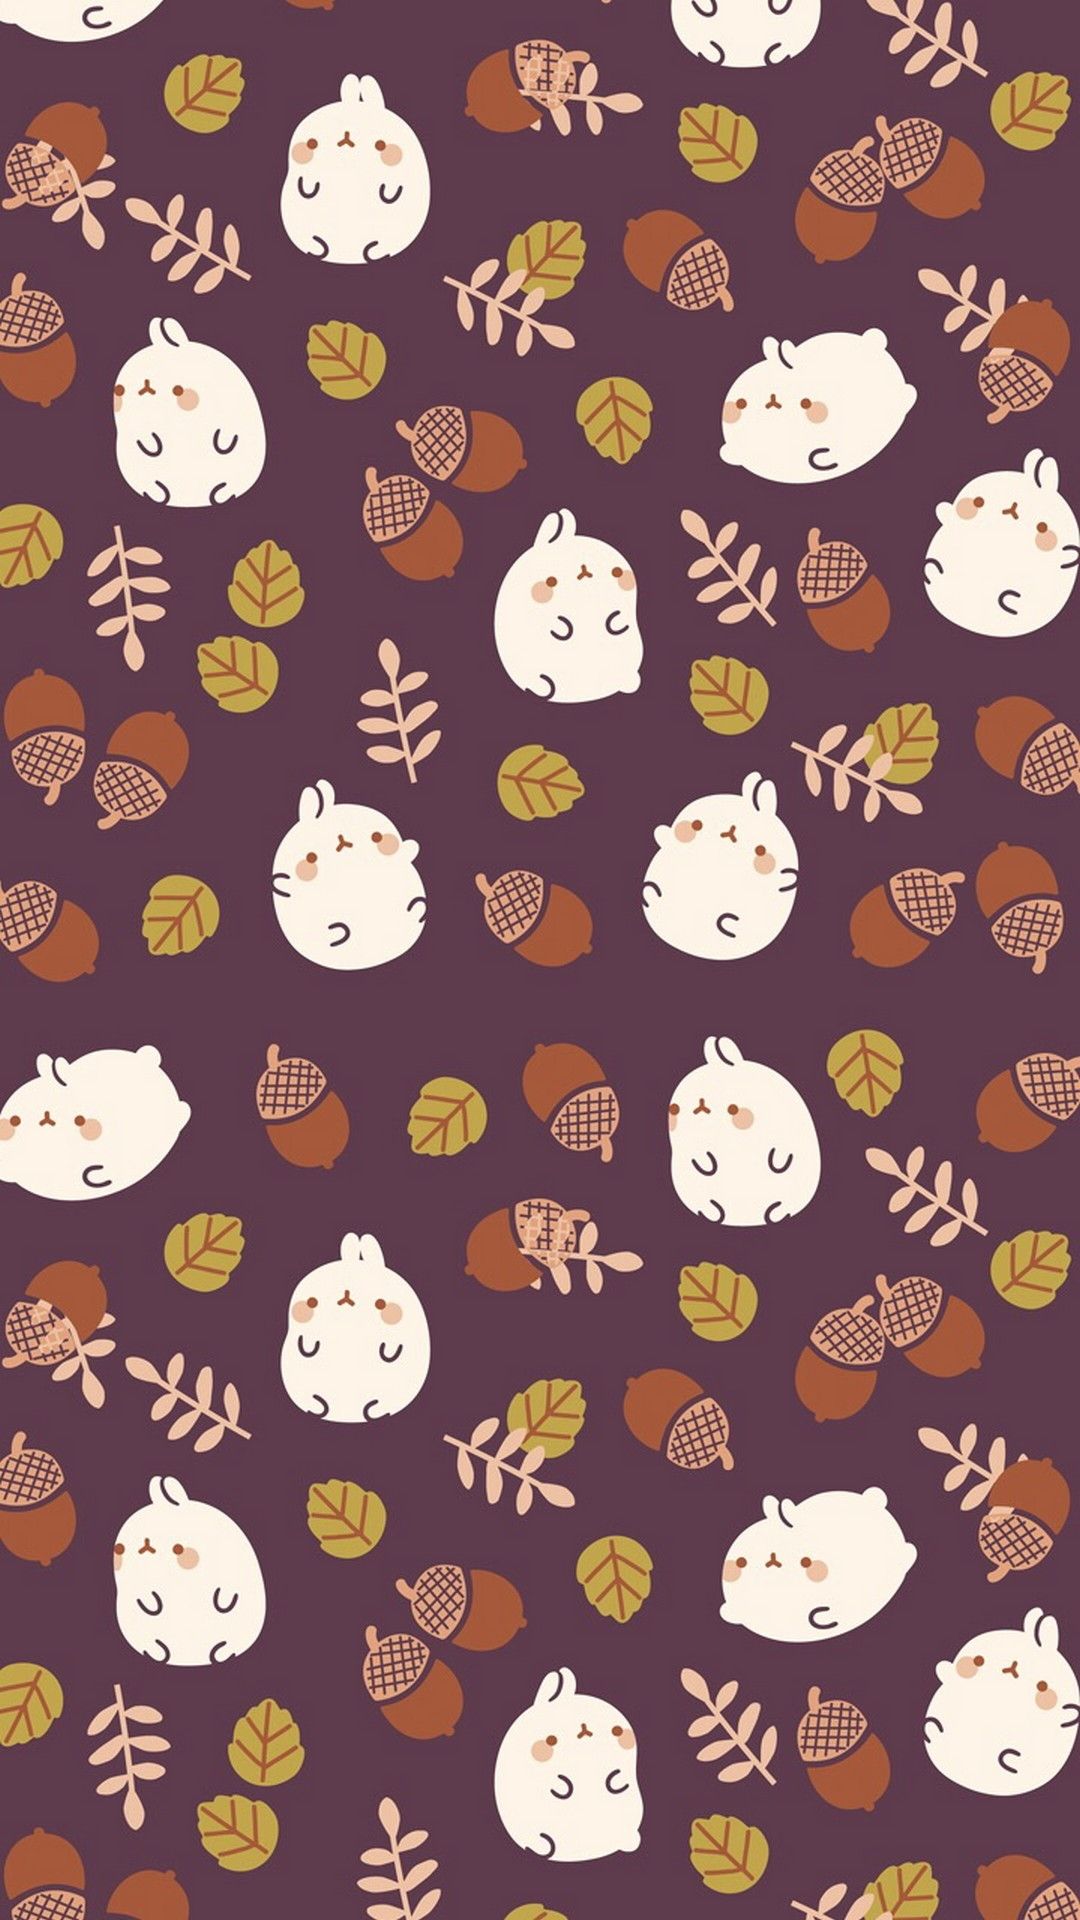 A pattern of cute little animals and leaves - Cute, pretty, pattern